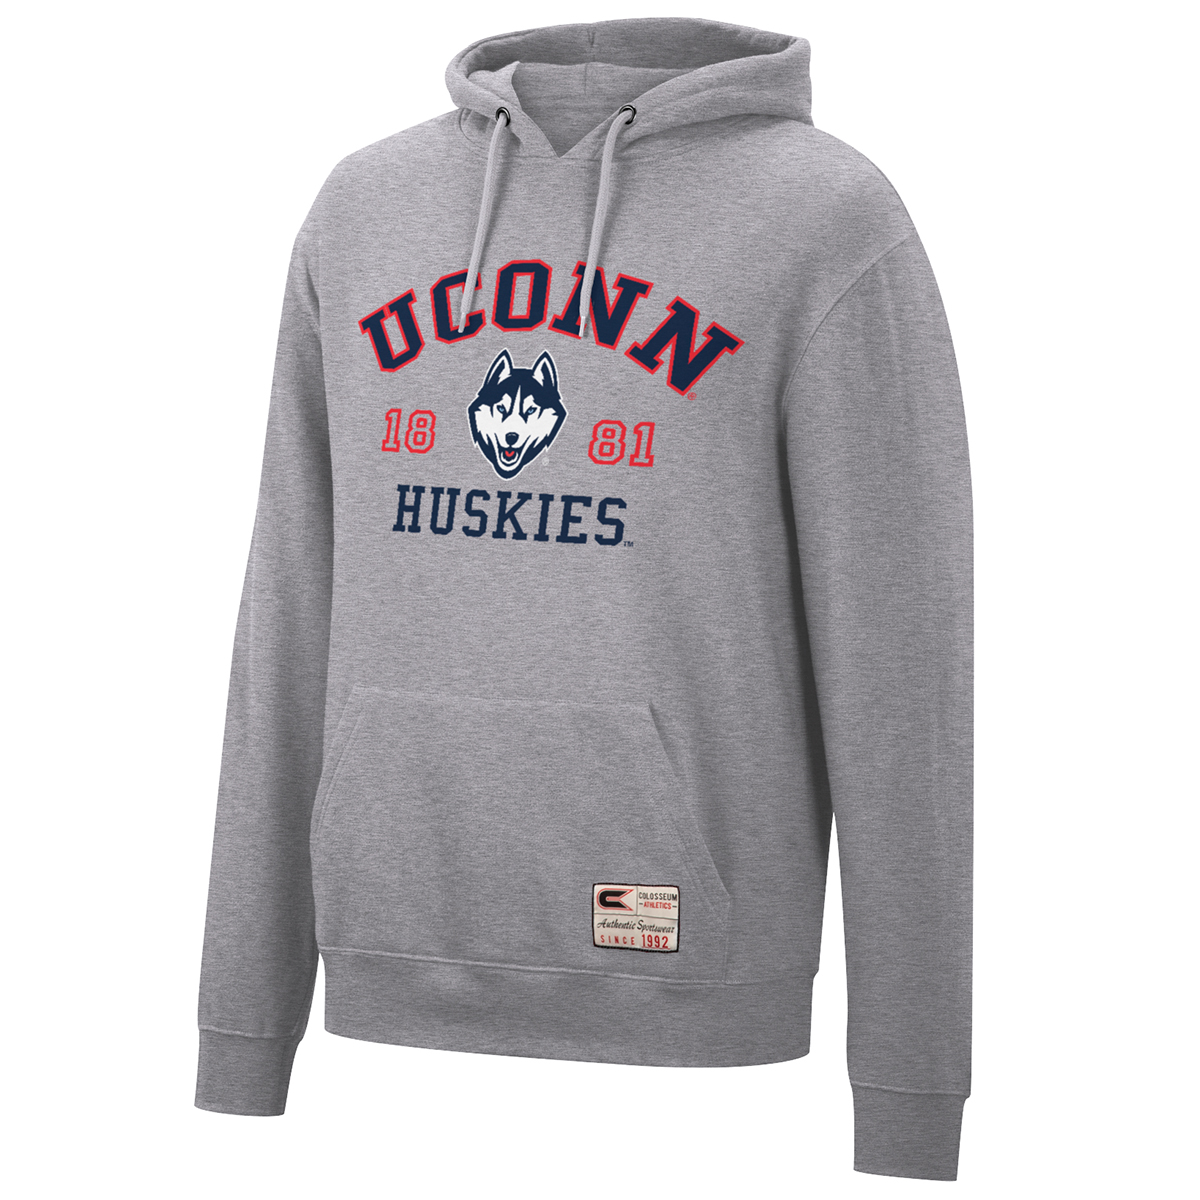 Uconn Men's Colosseum Authentic Pullover Hoodie